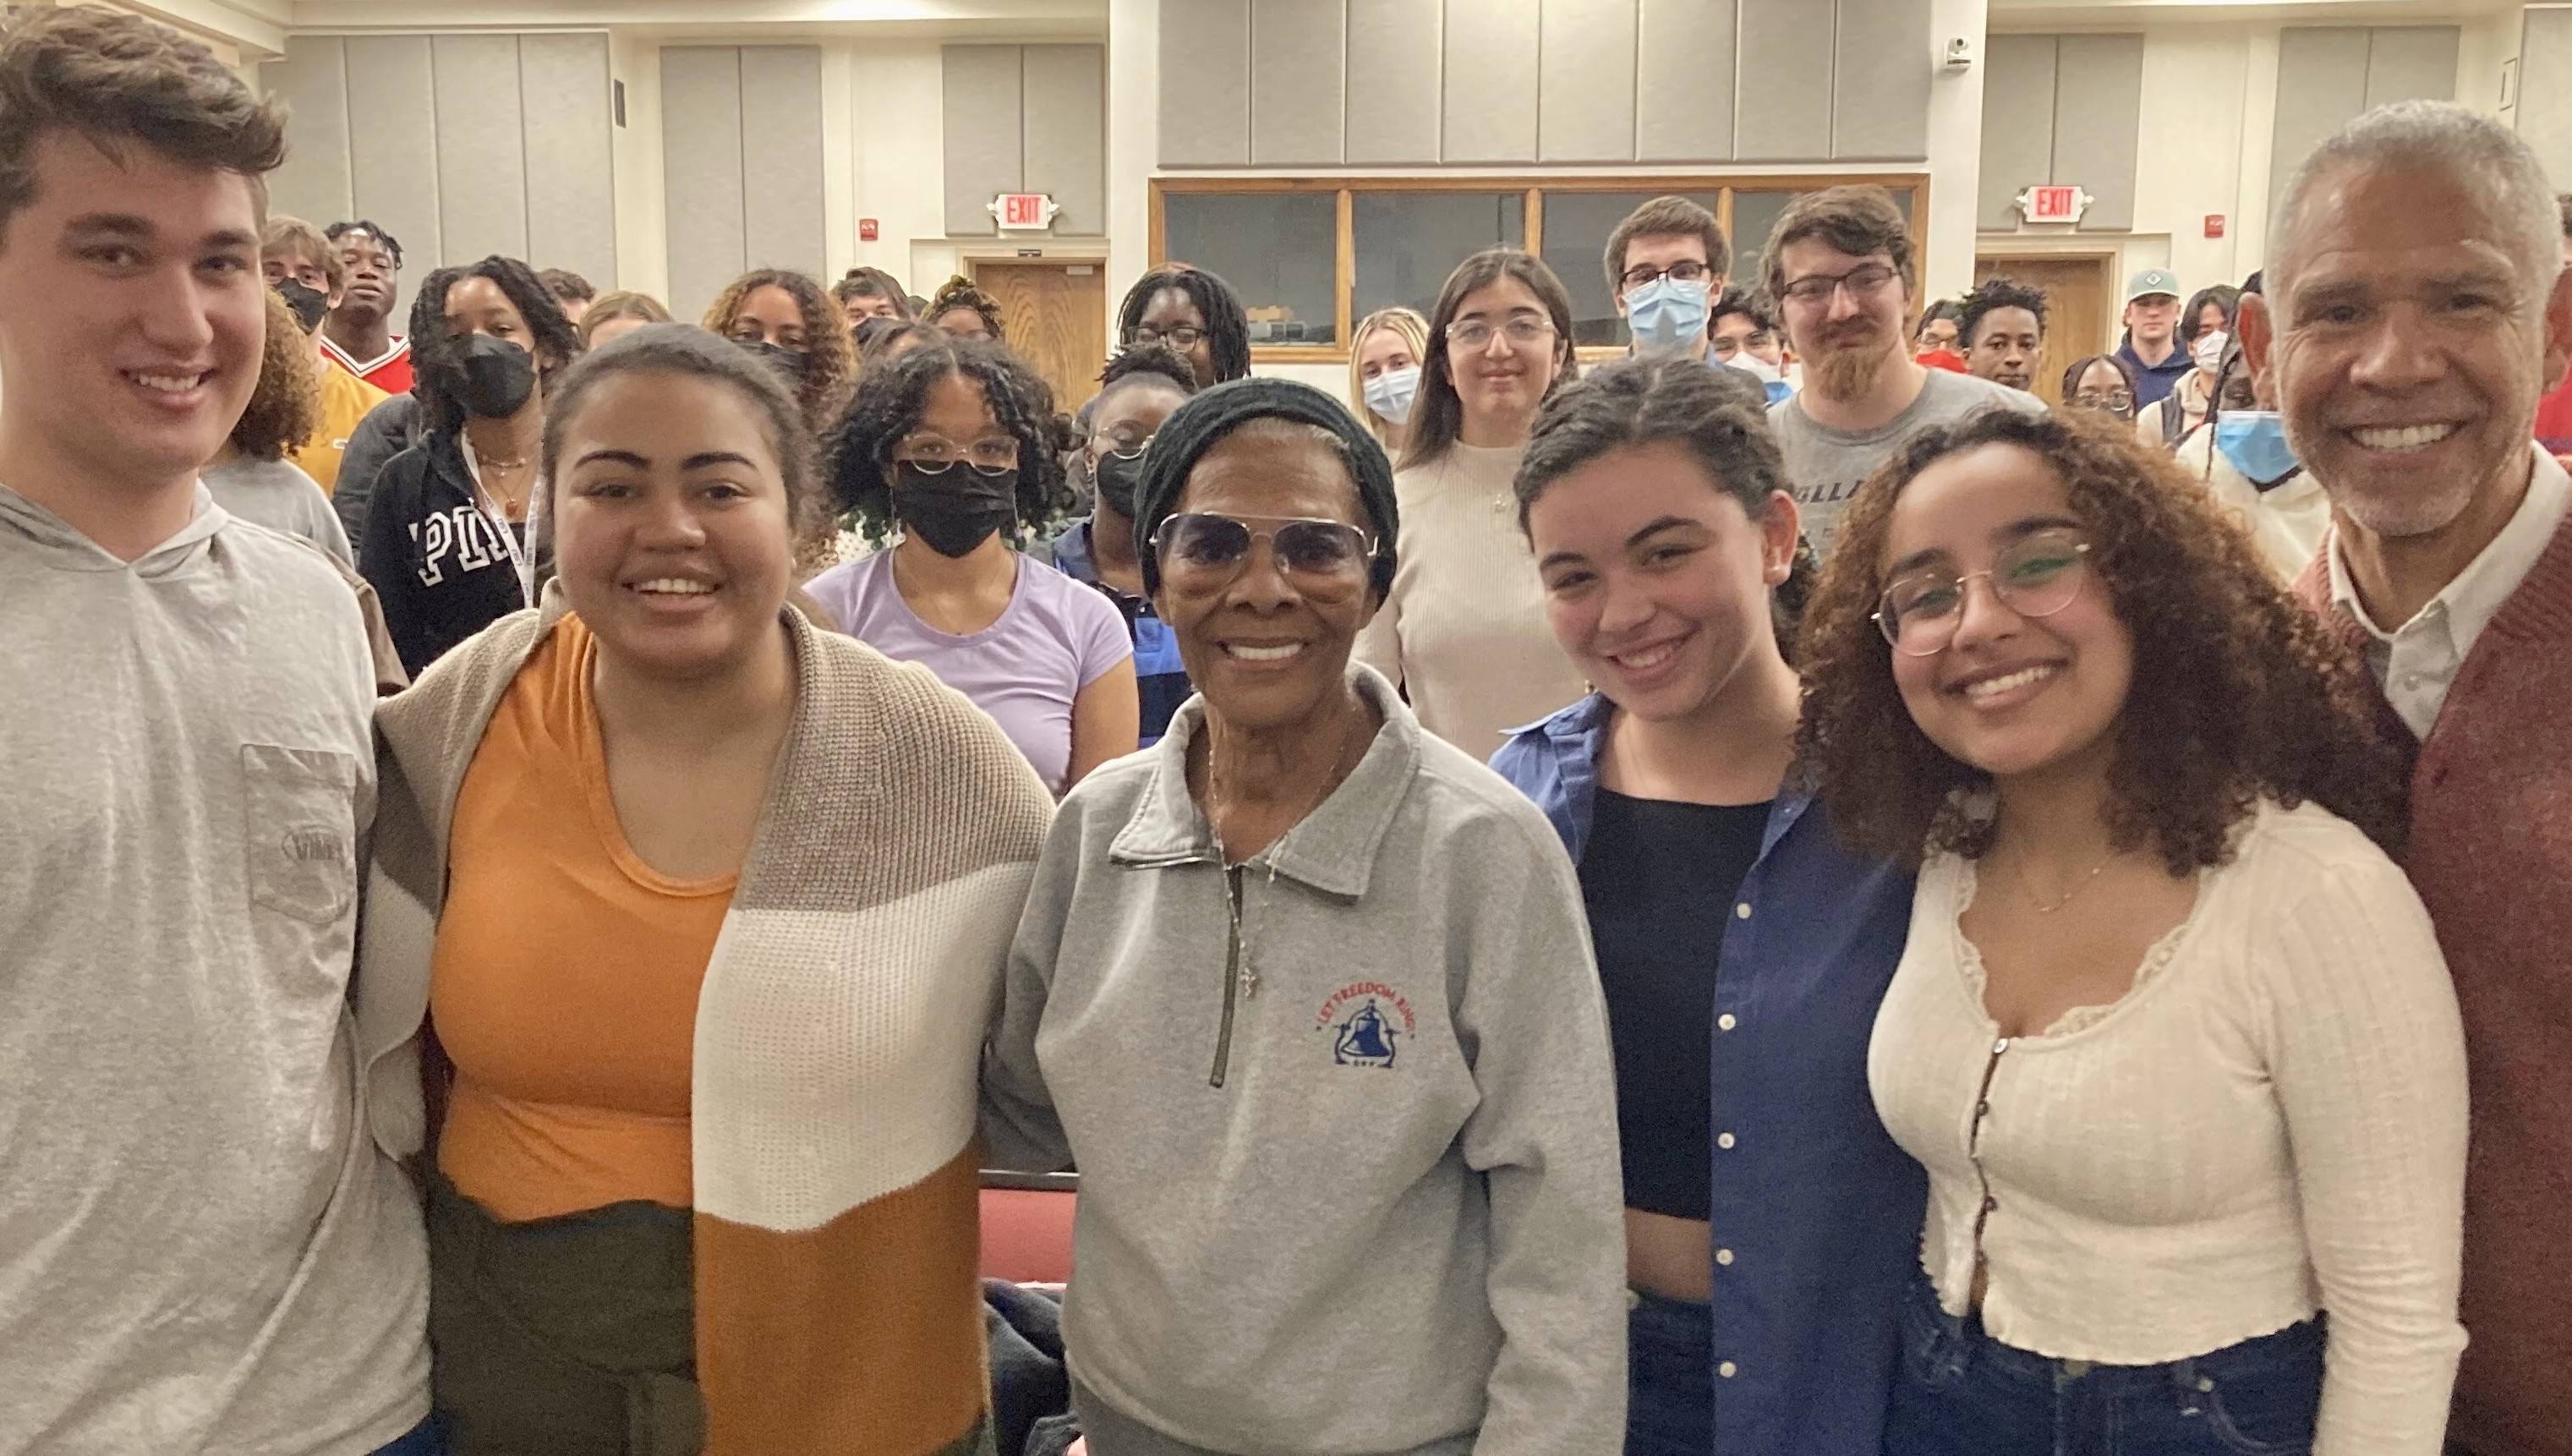 Dionne Warwick with students and Professor Scot Reese during a class visit